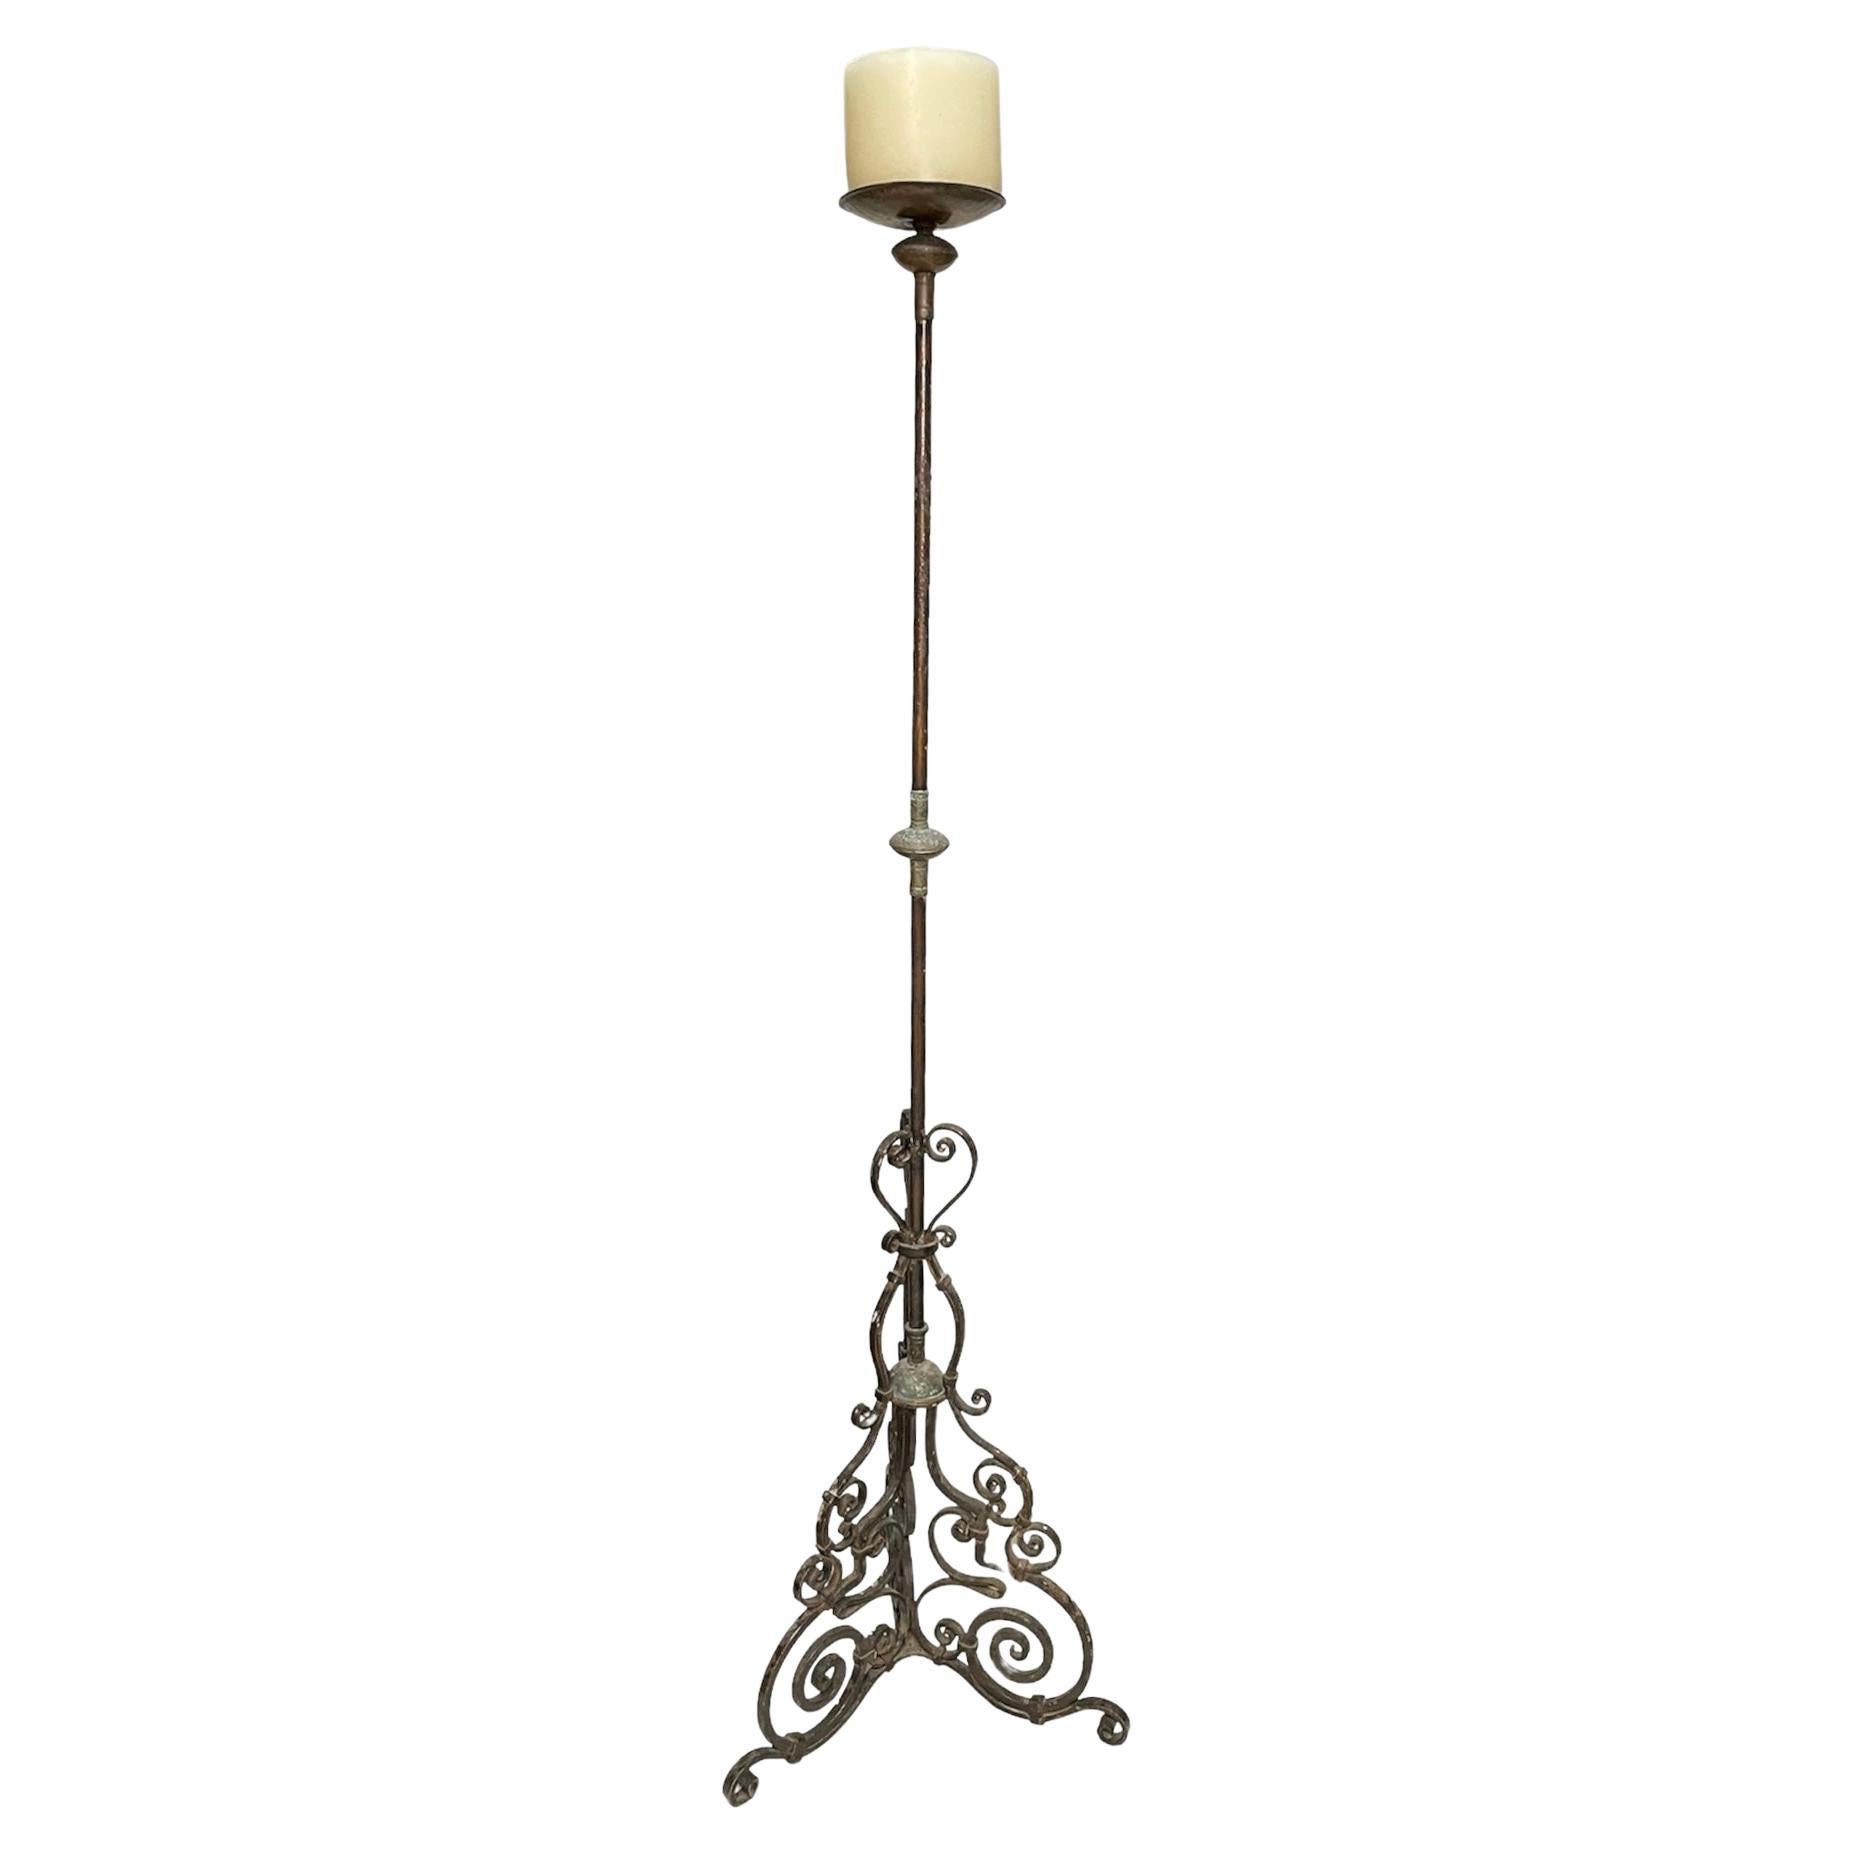 Gothic Style Wrought Iron Candle holder/Torchere